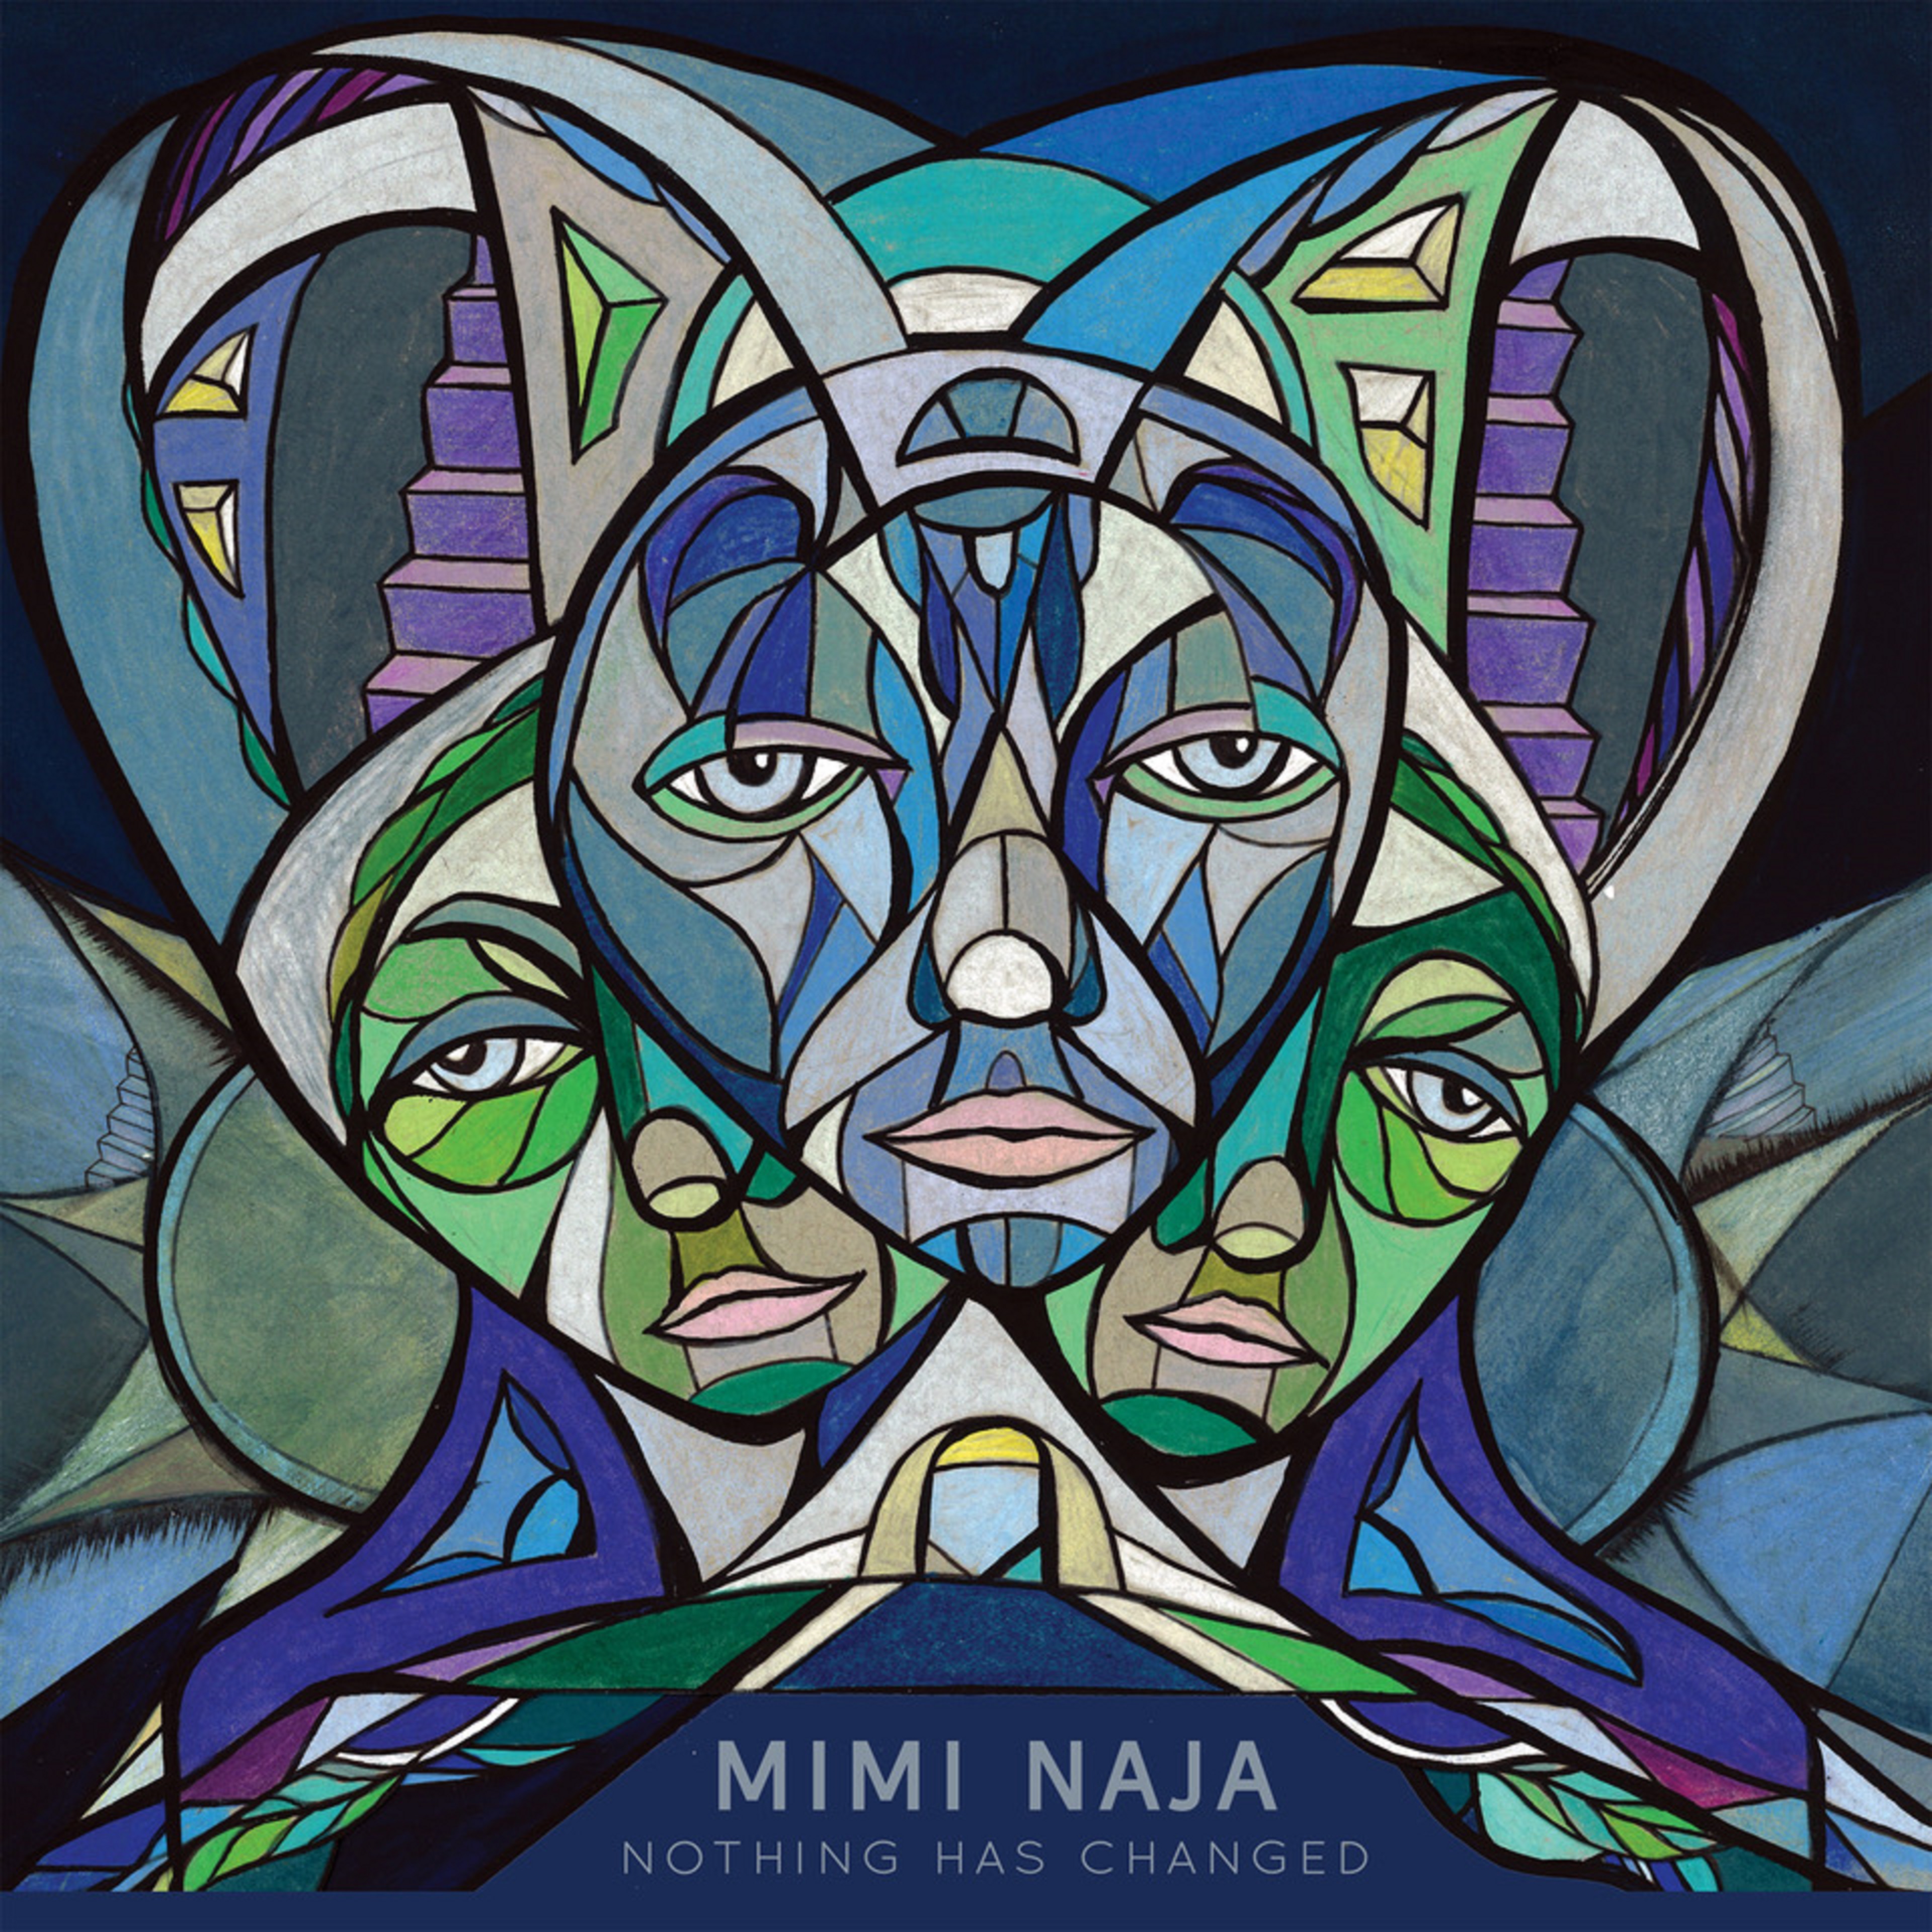 Mimi Naja of Fruition Debuts New Single "Coin In My Pocket”